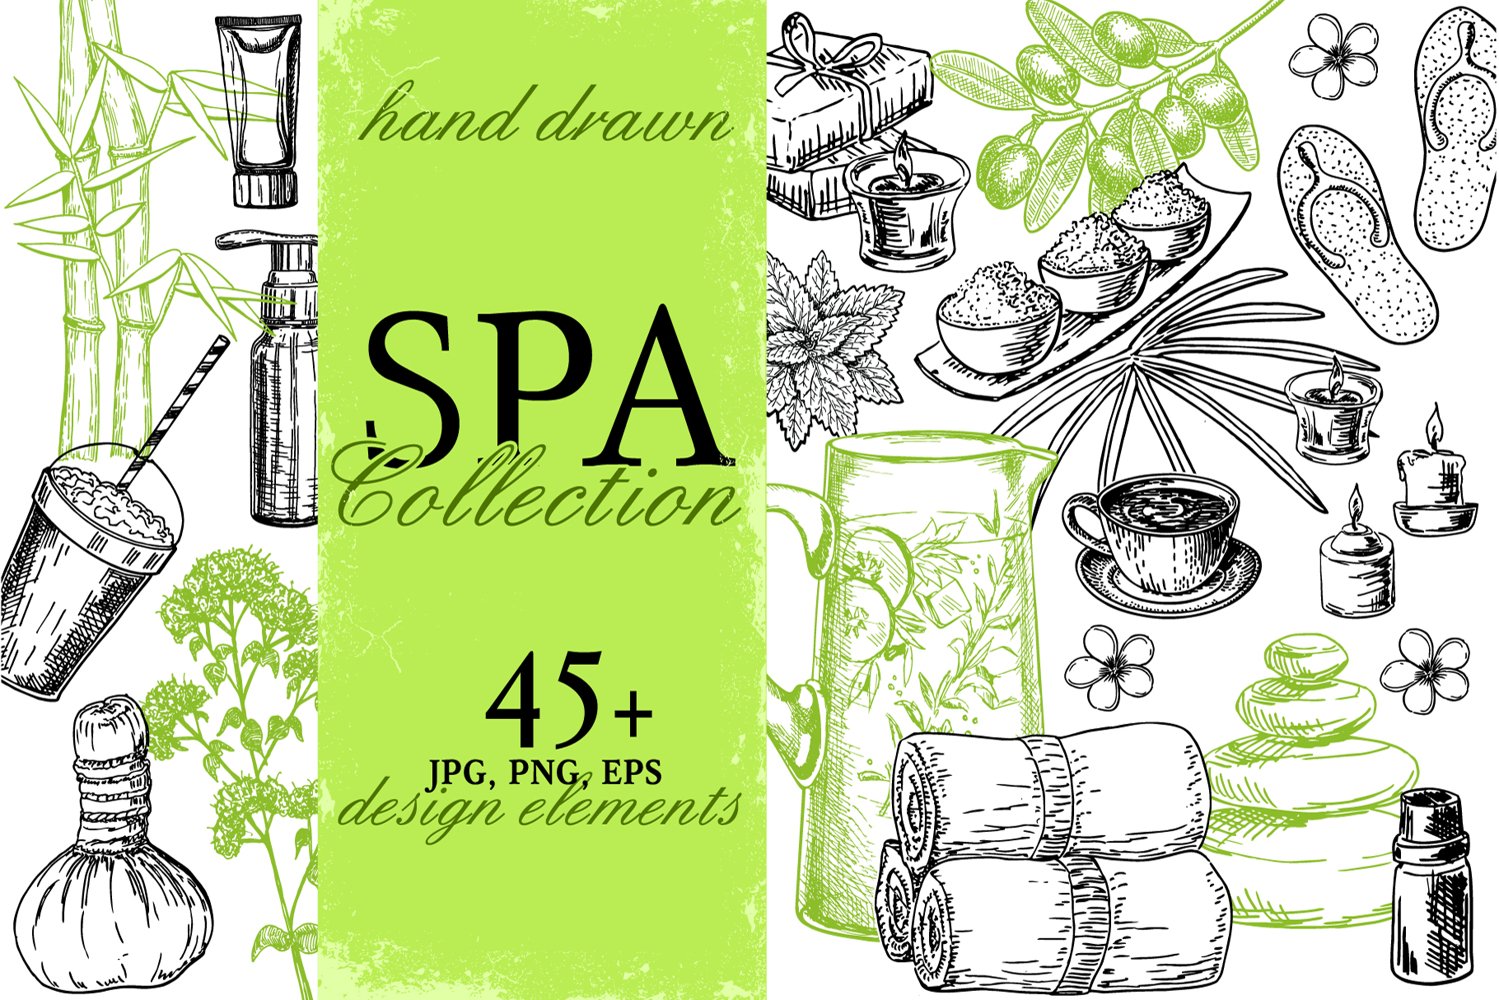 Cover image of Spa and beauty. Sketch illustration.